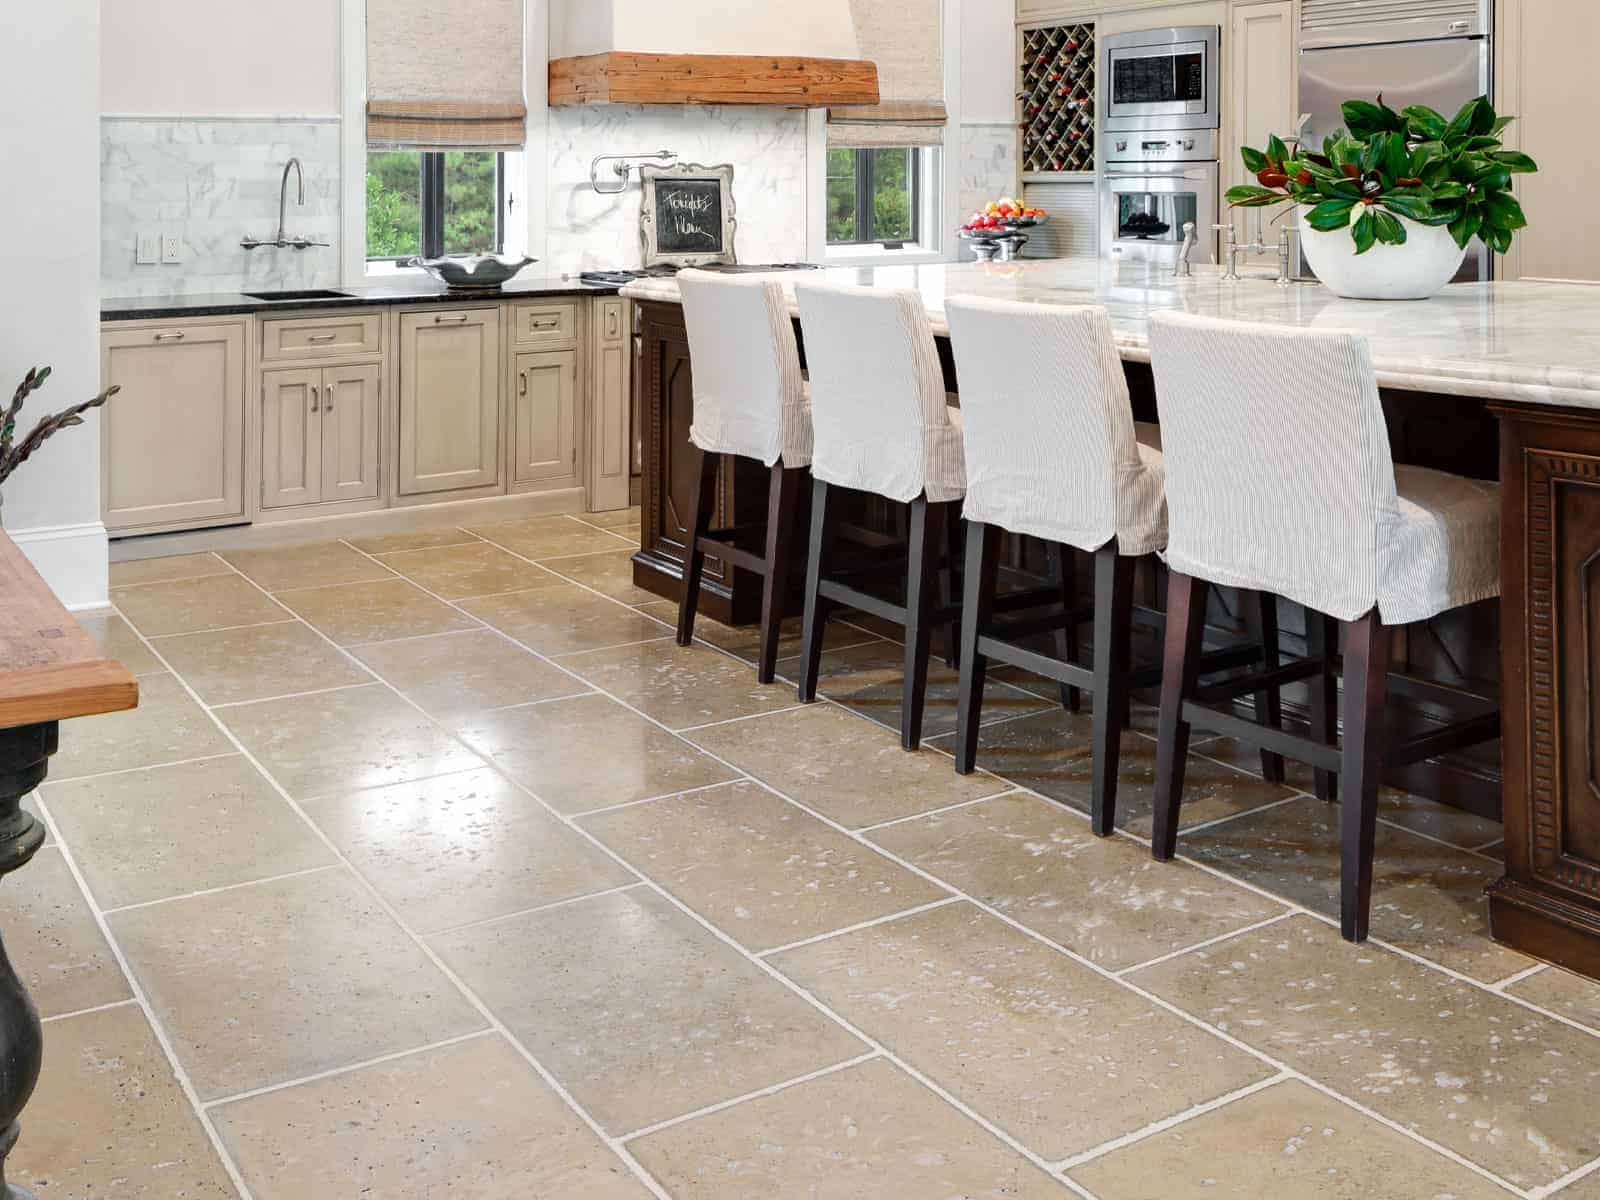 A classic kitchen with Buff colored concrete pavers